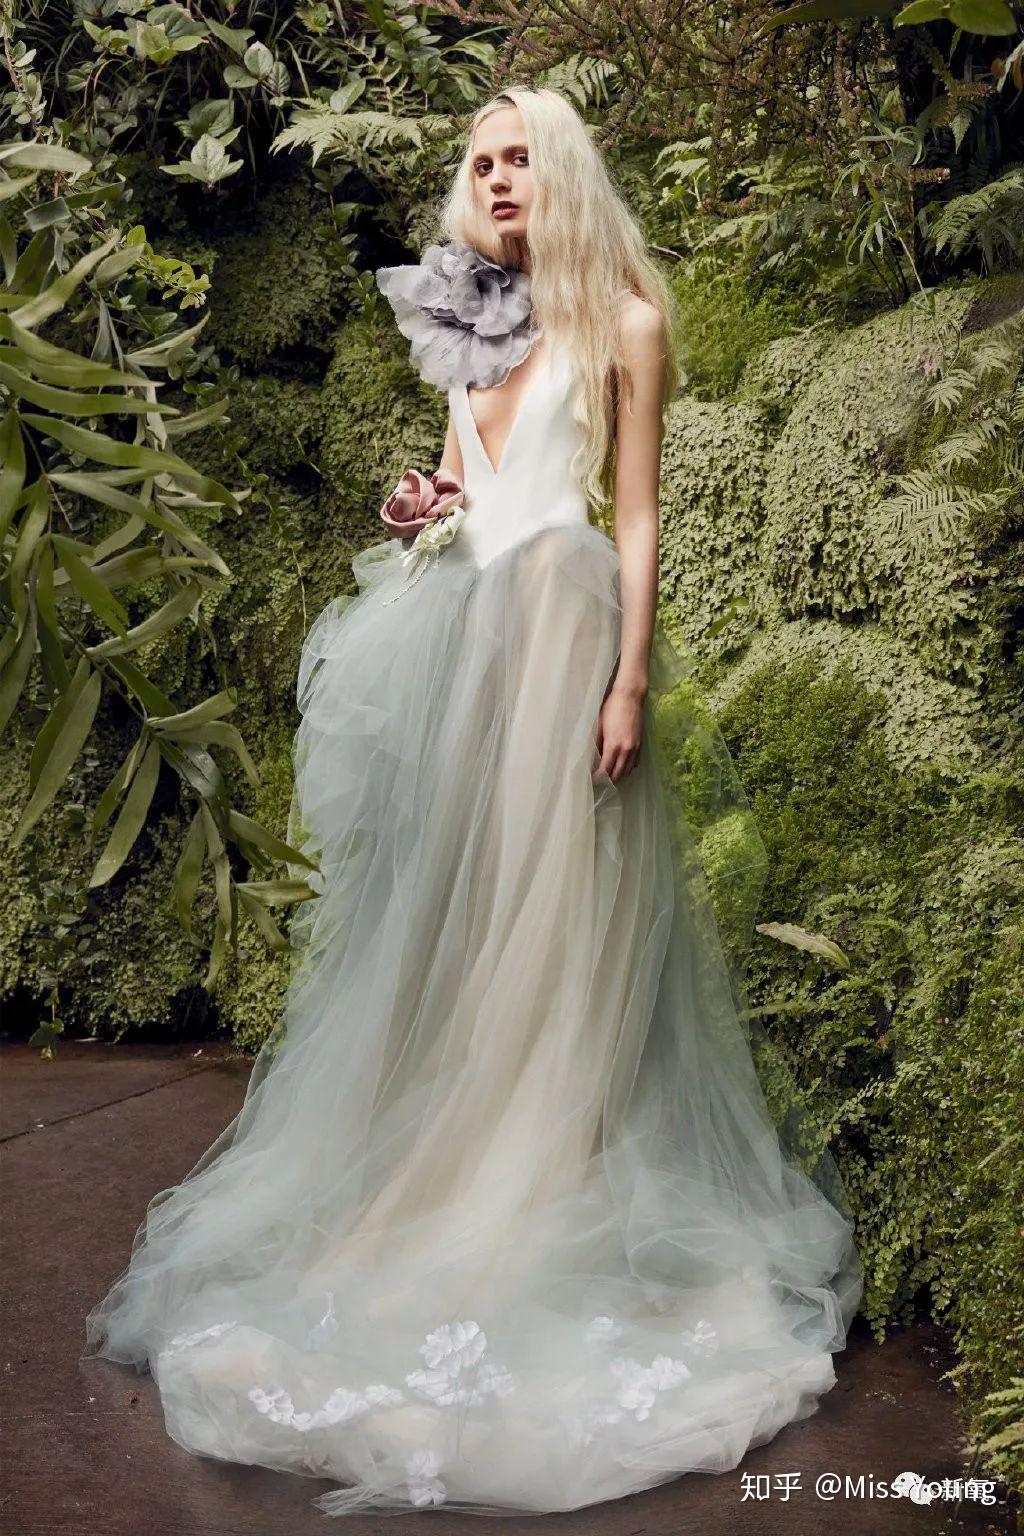 The Best Vera Wang Wedding Gowns of All Time | StyleCaster